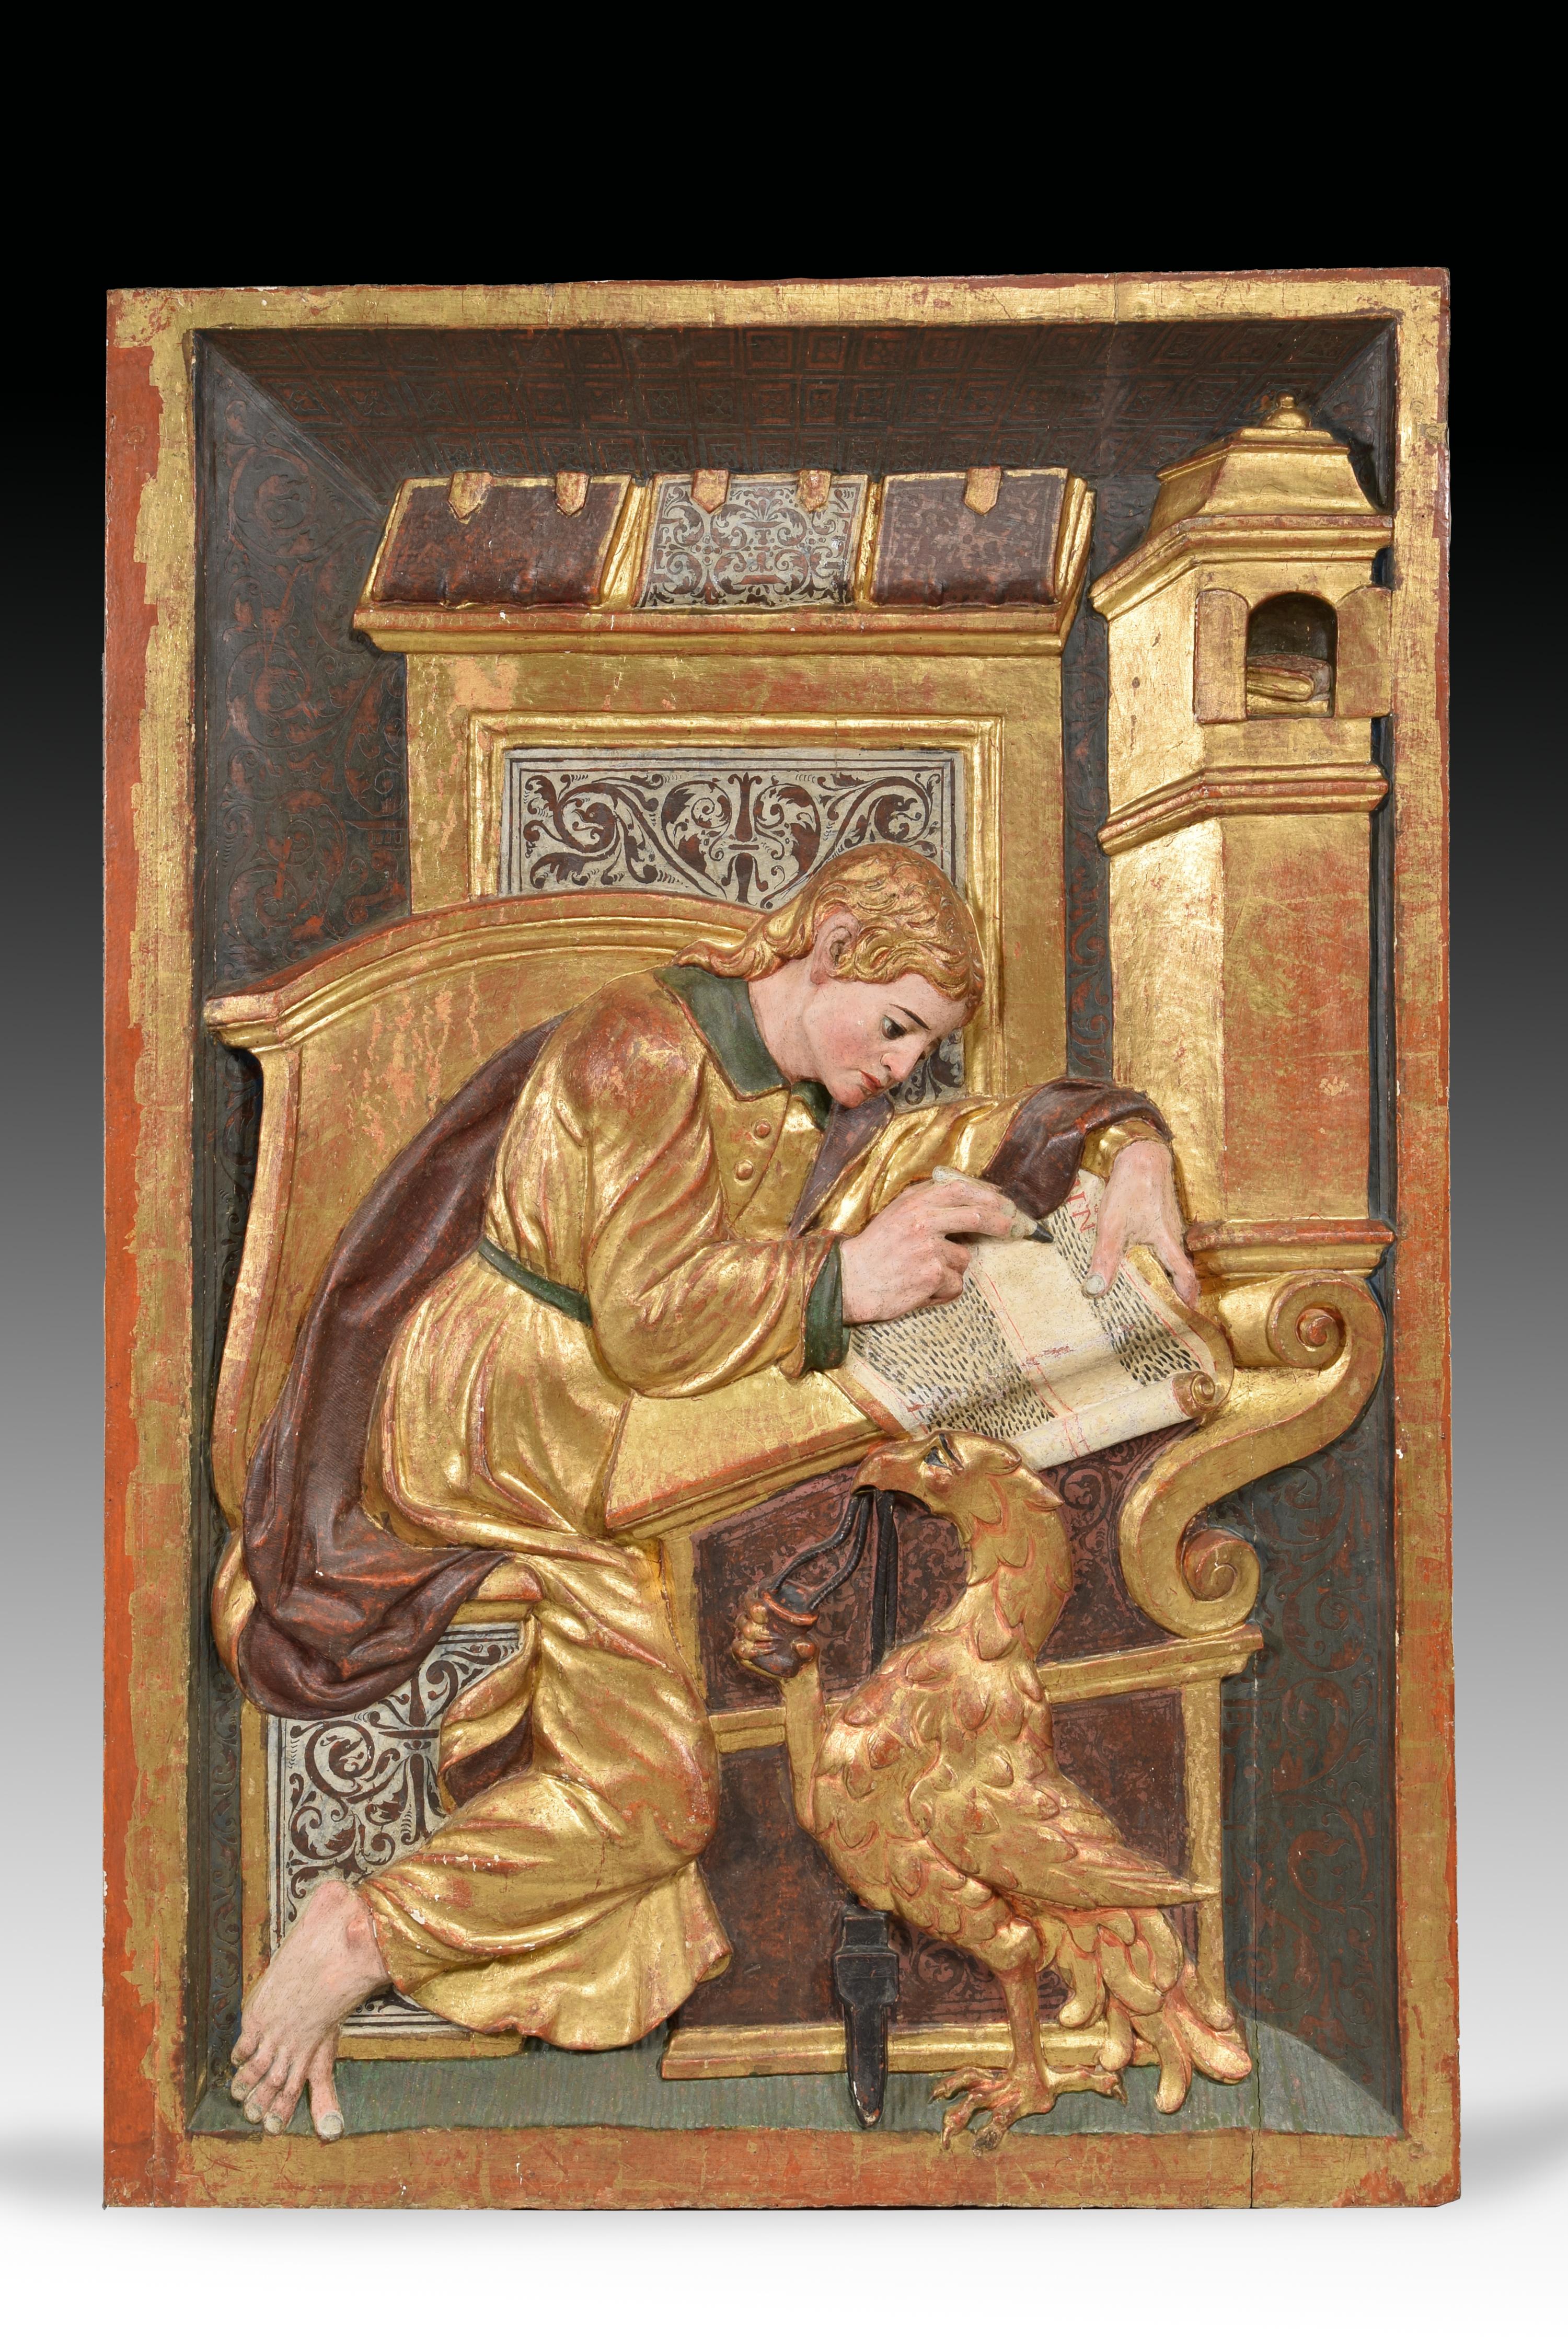 Pair of reliefs, San Juan and San Mateo. Polychrome wood. Possibly, Burgos school, 16th century.
 Pair of carved and polychrome wood reliefs that each show a seated human figure writing, surrounded by books and accompanied by a figure respectively.